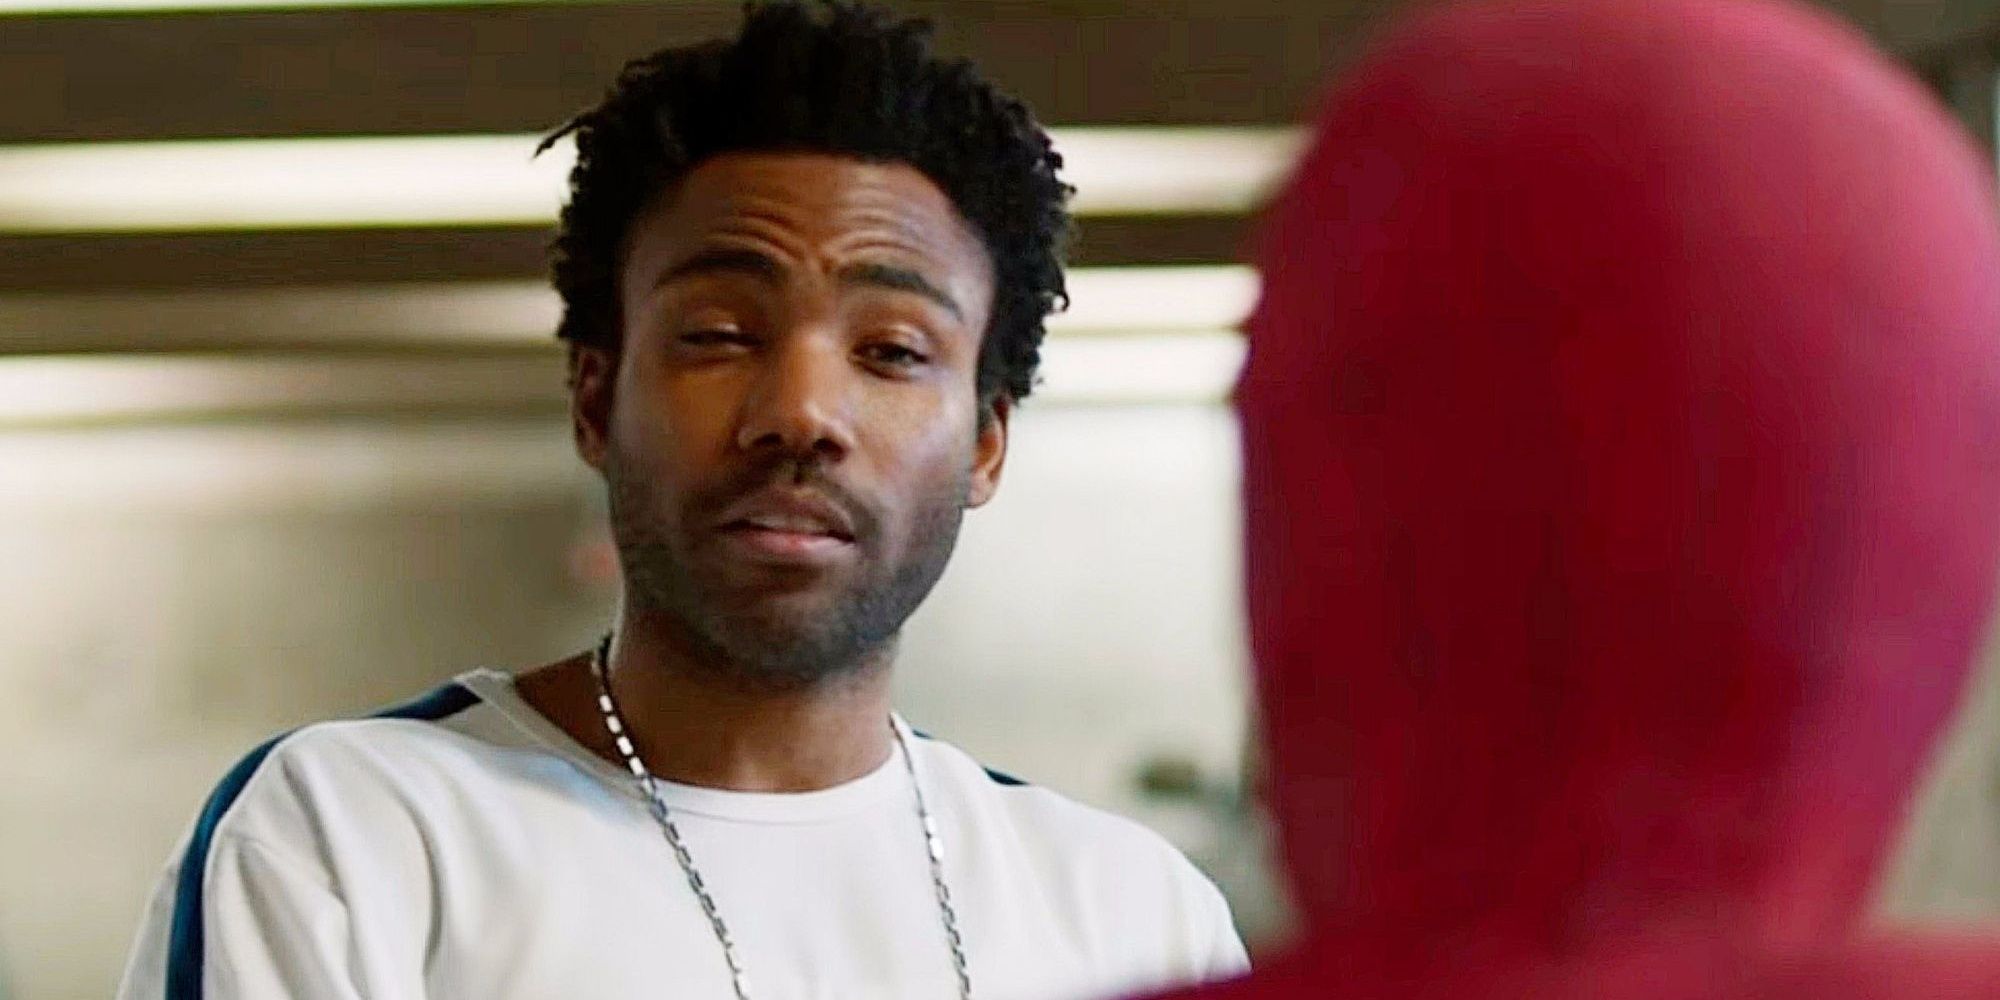 Donald Glover in 'Spider-Man: Homecoming' during the weapons deal interrogation